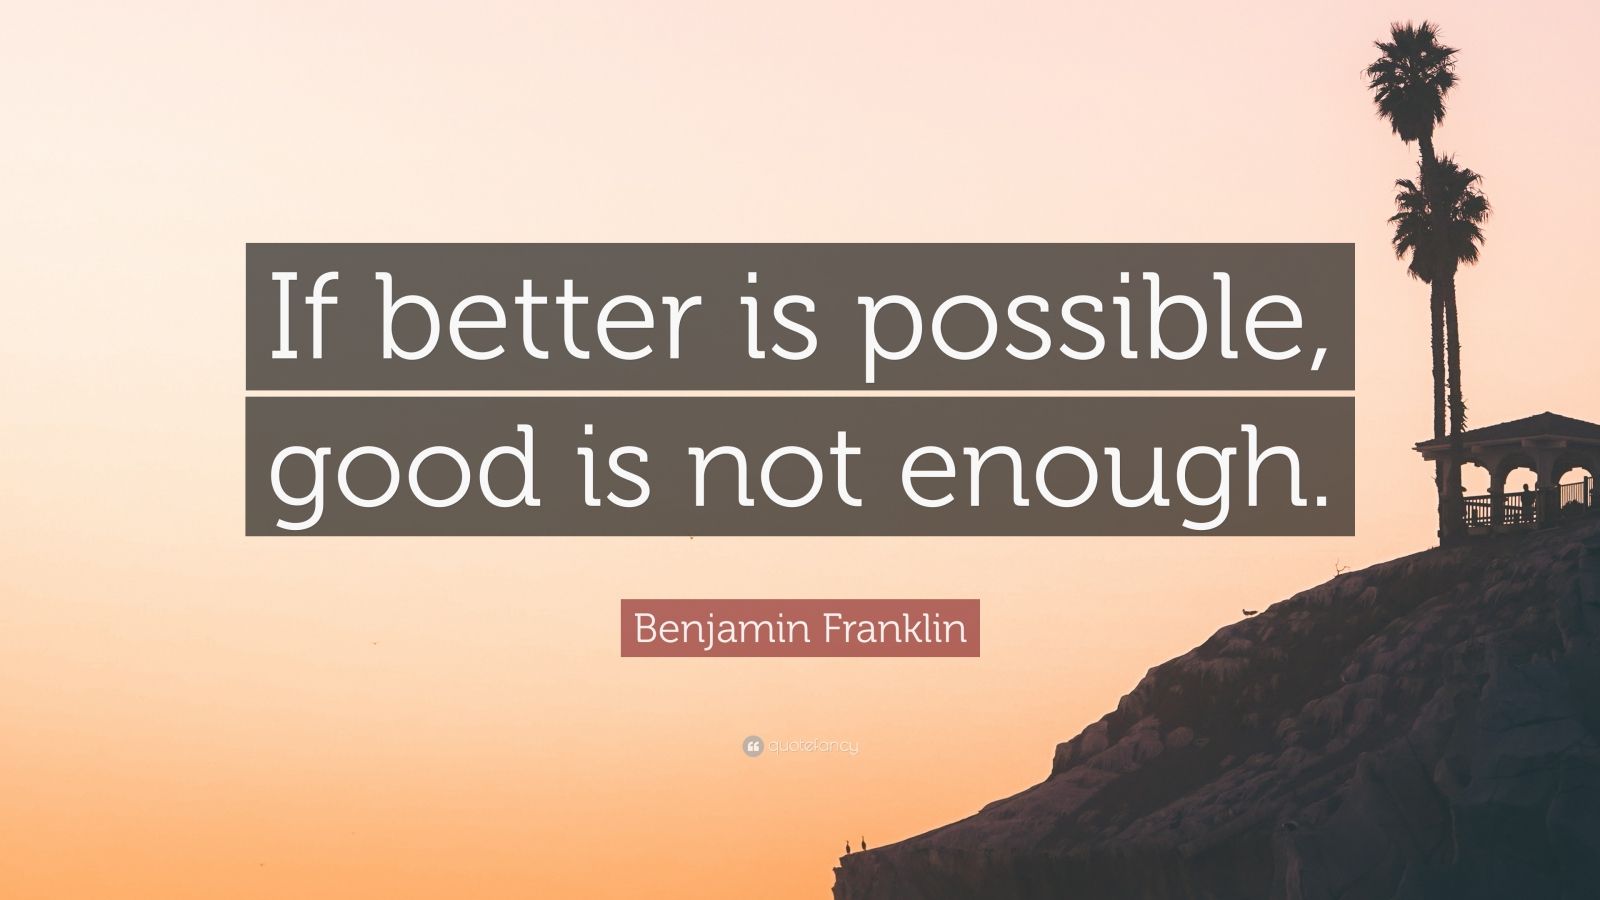 Benjamin Franklin Quote: “If better is possible, good is not enough